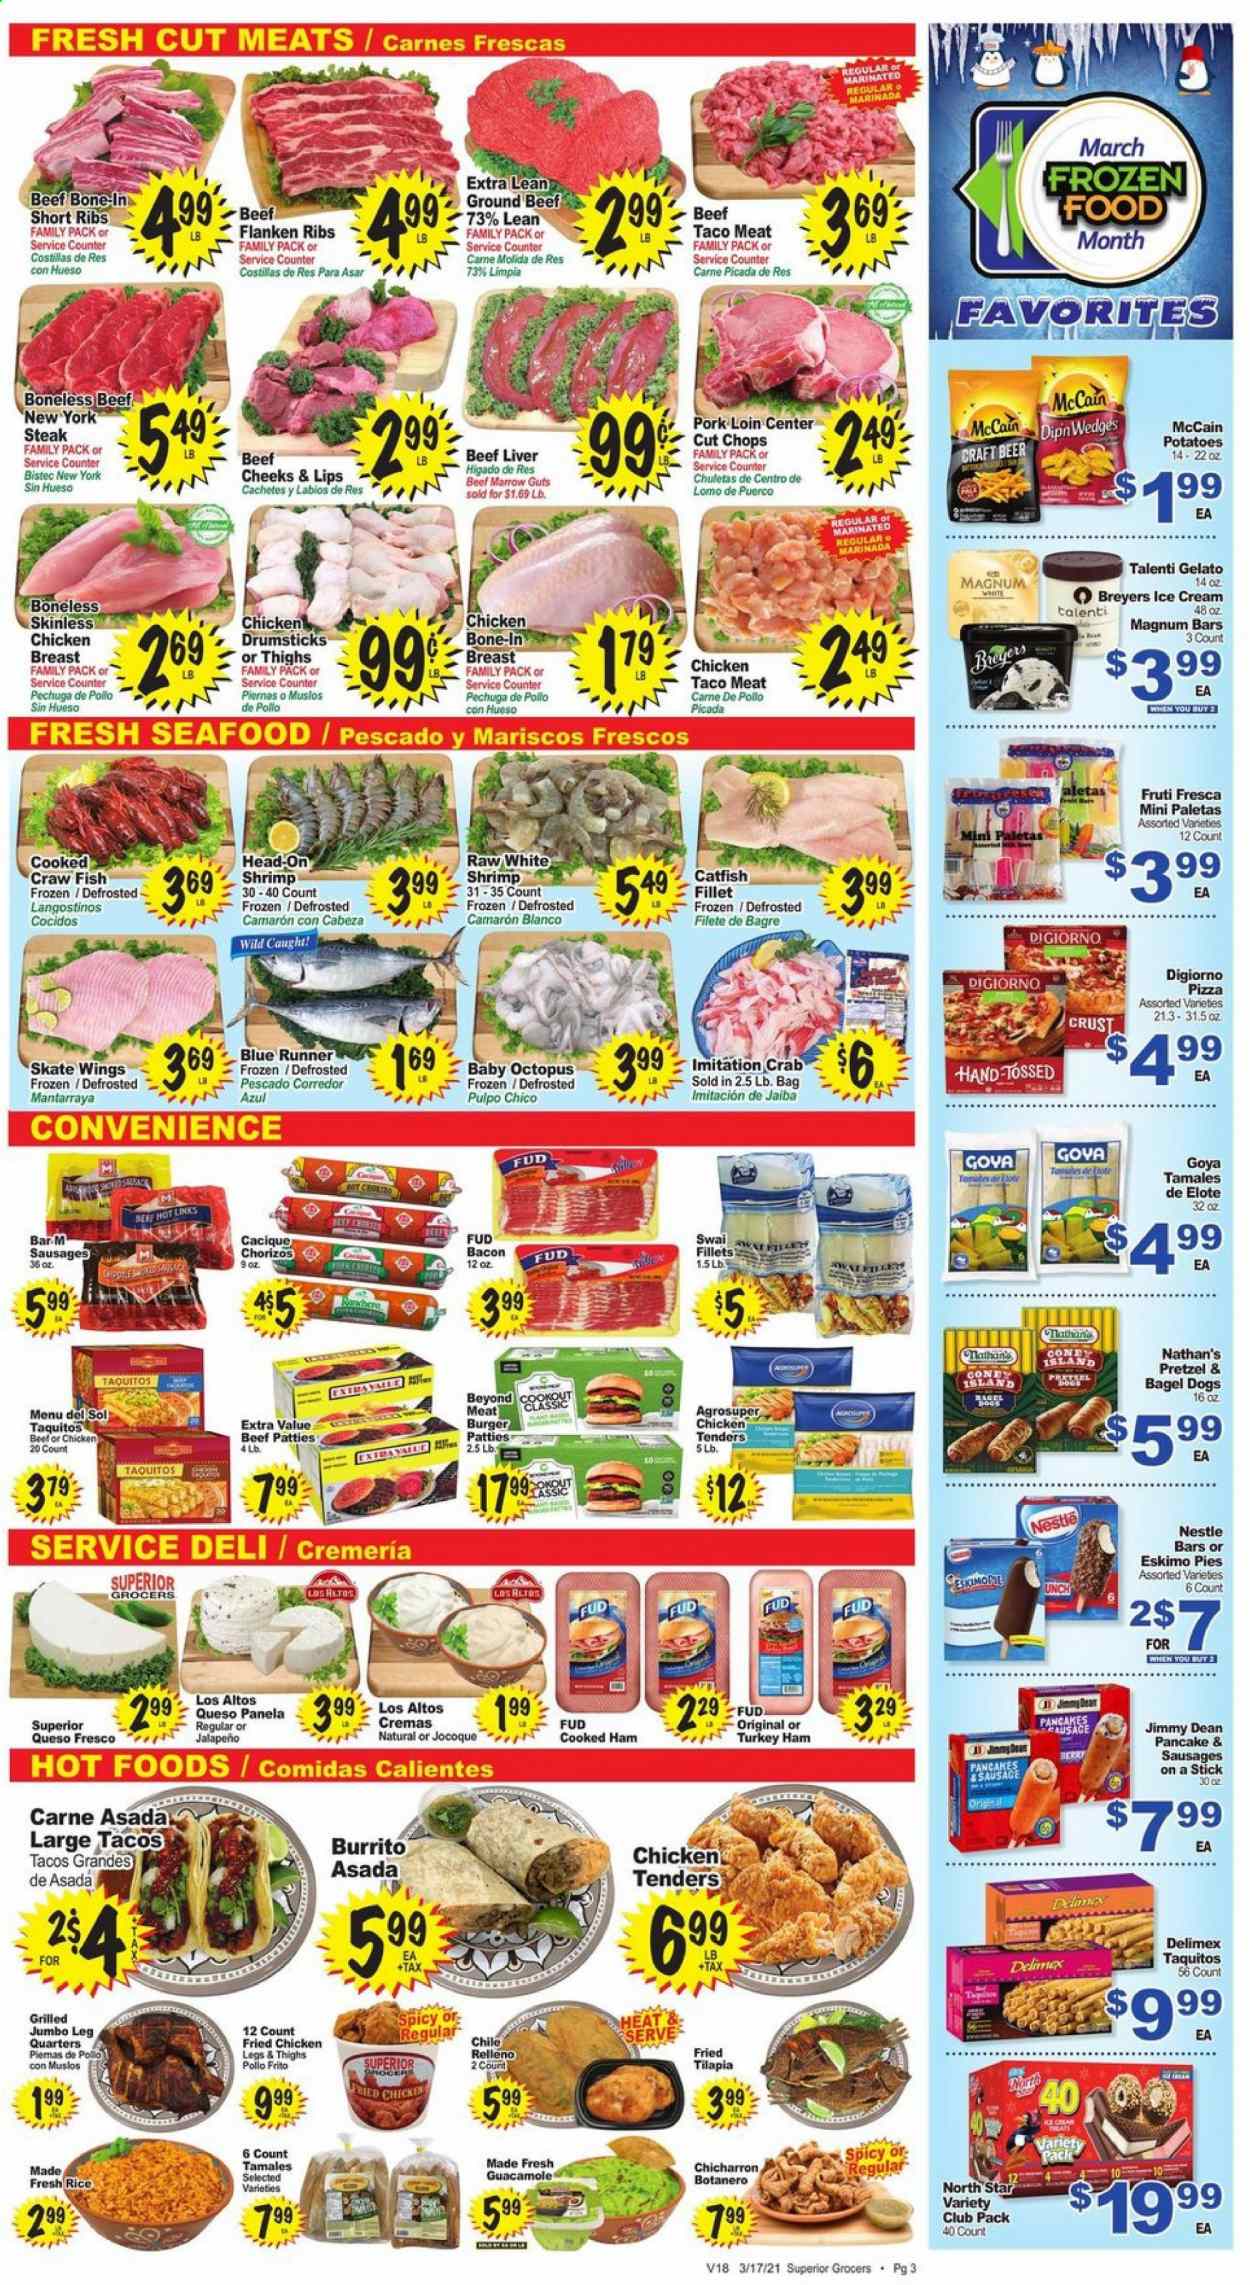 thumbnail - Superior Grocers Flyer - 03/17/2021 - 03/23/2021 - Sales products - pretzels, tacos, pancakes, chicken breasts, chicken legs, chicken tenders, beef liver, beef meat, ground beef, steak, hamburger, burger patties, pork loin, pork meat, catfish, tilapia, octopus, seafood, crab, fish, shrimps, swai fillet, pizza, fried chicken, burrito, bagel dogs, Menu Del Sol, taquitos, Jimmy Dean, bacon, cooked ham, ham, sausage, guacamole, queso fresco, ice cream, Talenti Gelato, gelato, McCain, Nestlé, jalapeño, Goya, rice, beer. Page 3.